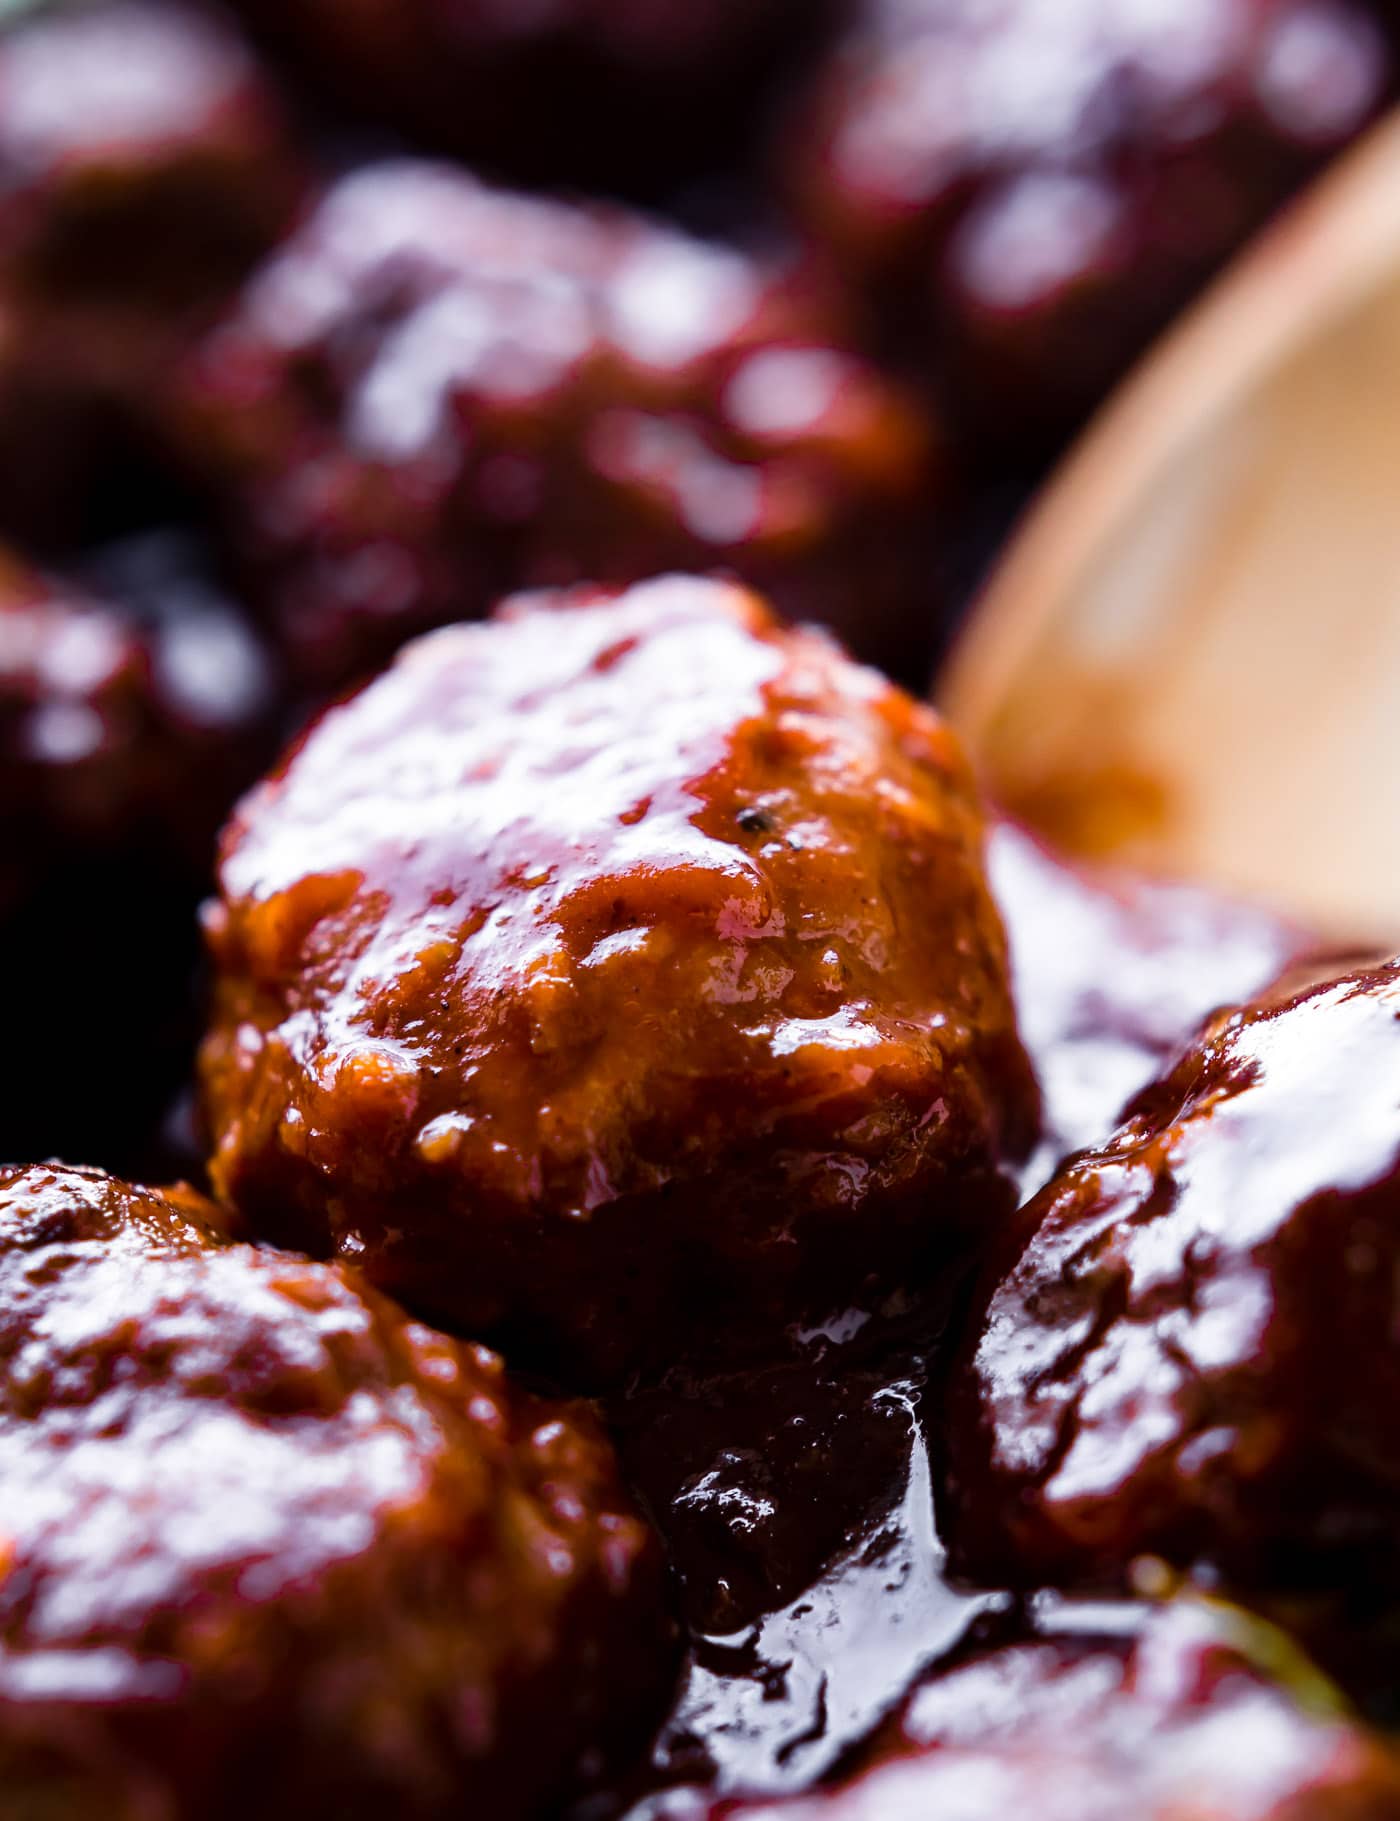 Paleo friendly 5 Spice BBQ Meatballs with a zesty Orange Hoisin sauce! These Asian Style BBQ meatballs are quick to prep and cooked in just 30 minutes. Paleo options for ingredients, no refined sugar, and protein packed. Serve as an appetizer, meal, or a quick protein for easy meal prep planning. Freezer friendly, lower in refined sugar and carbohydrates.